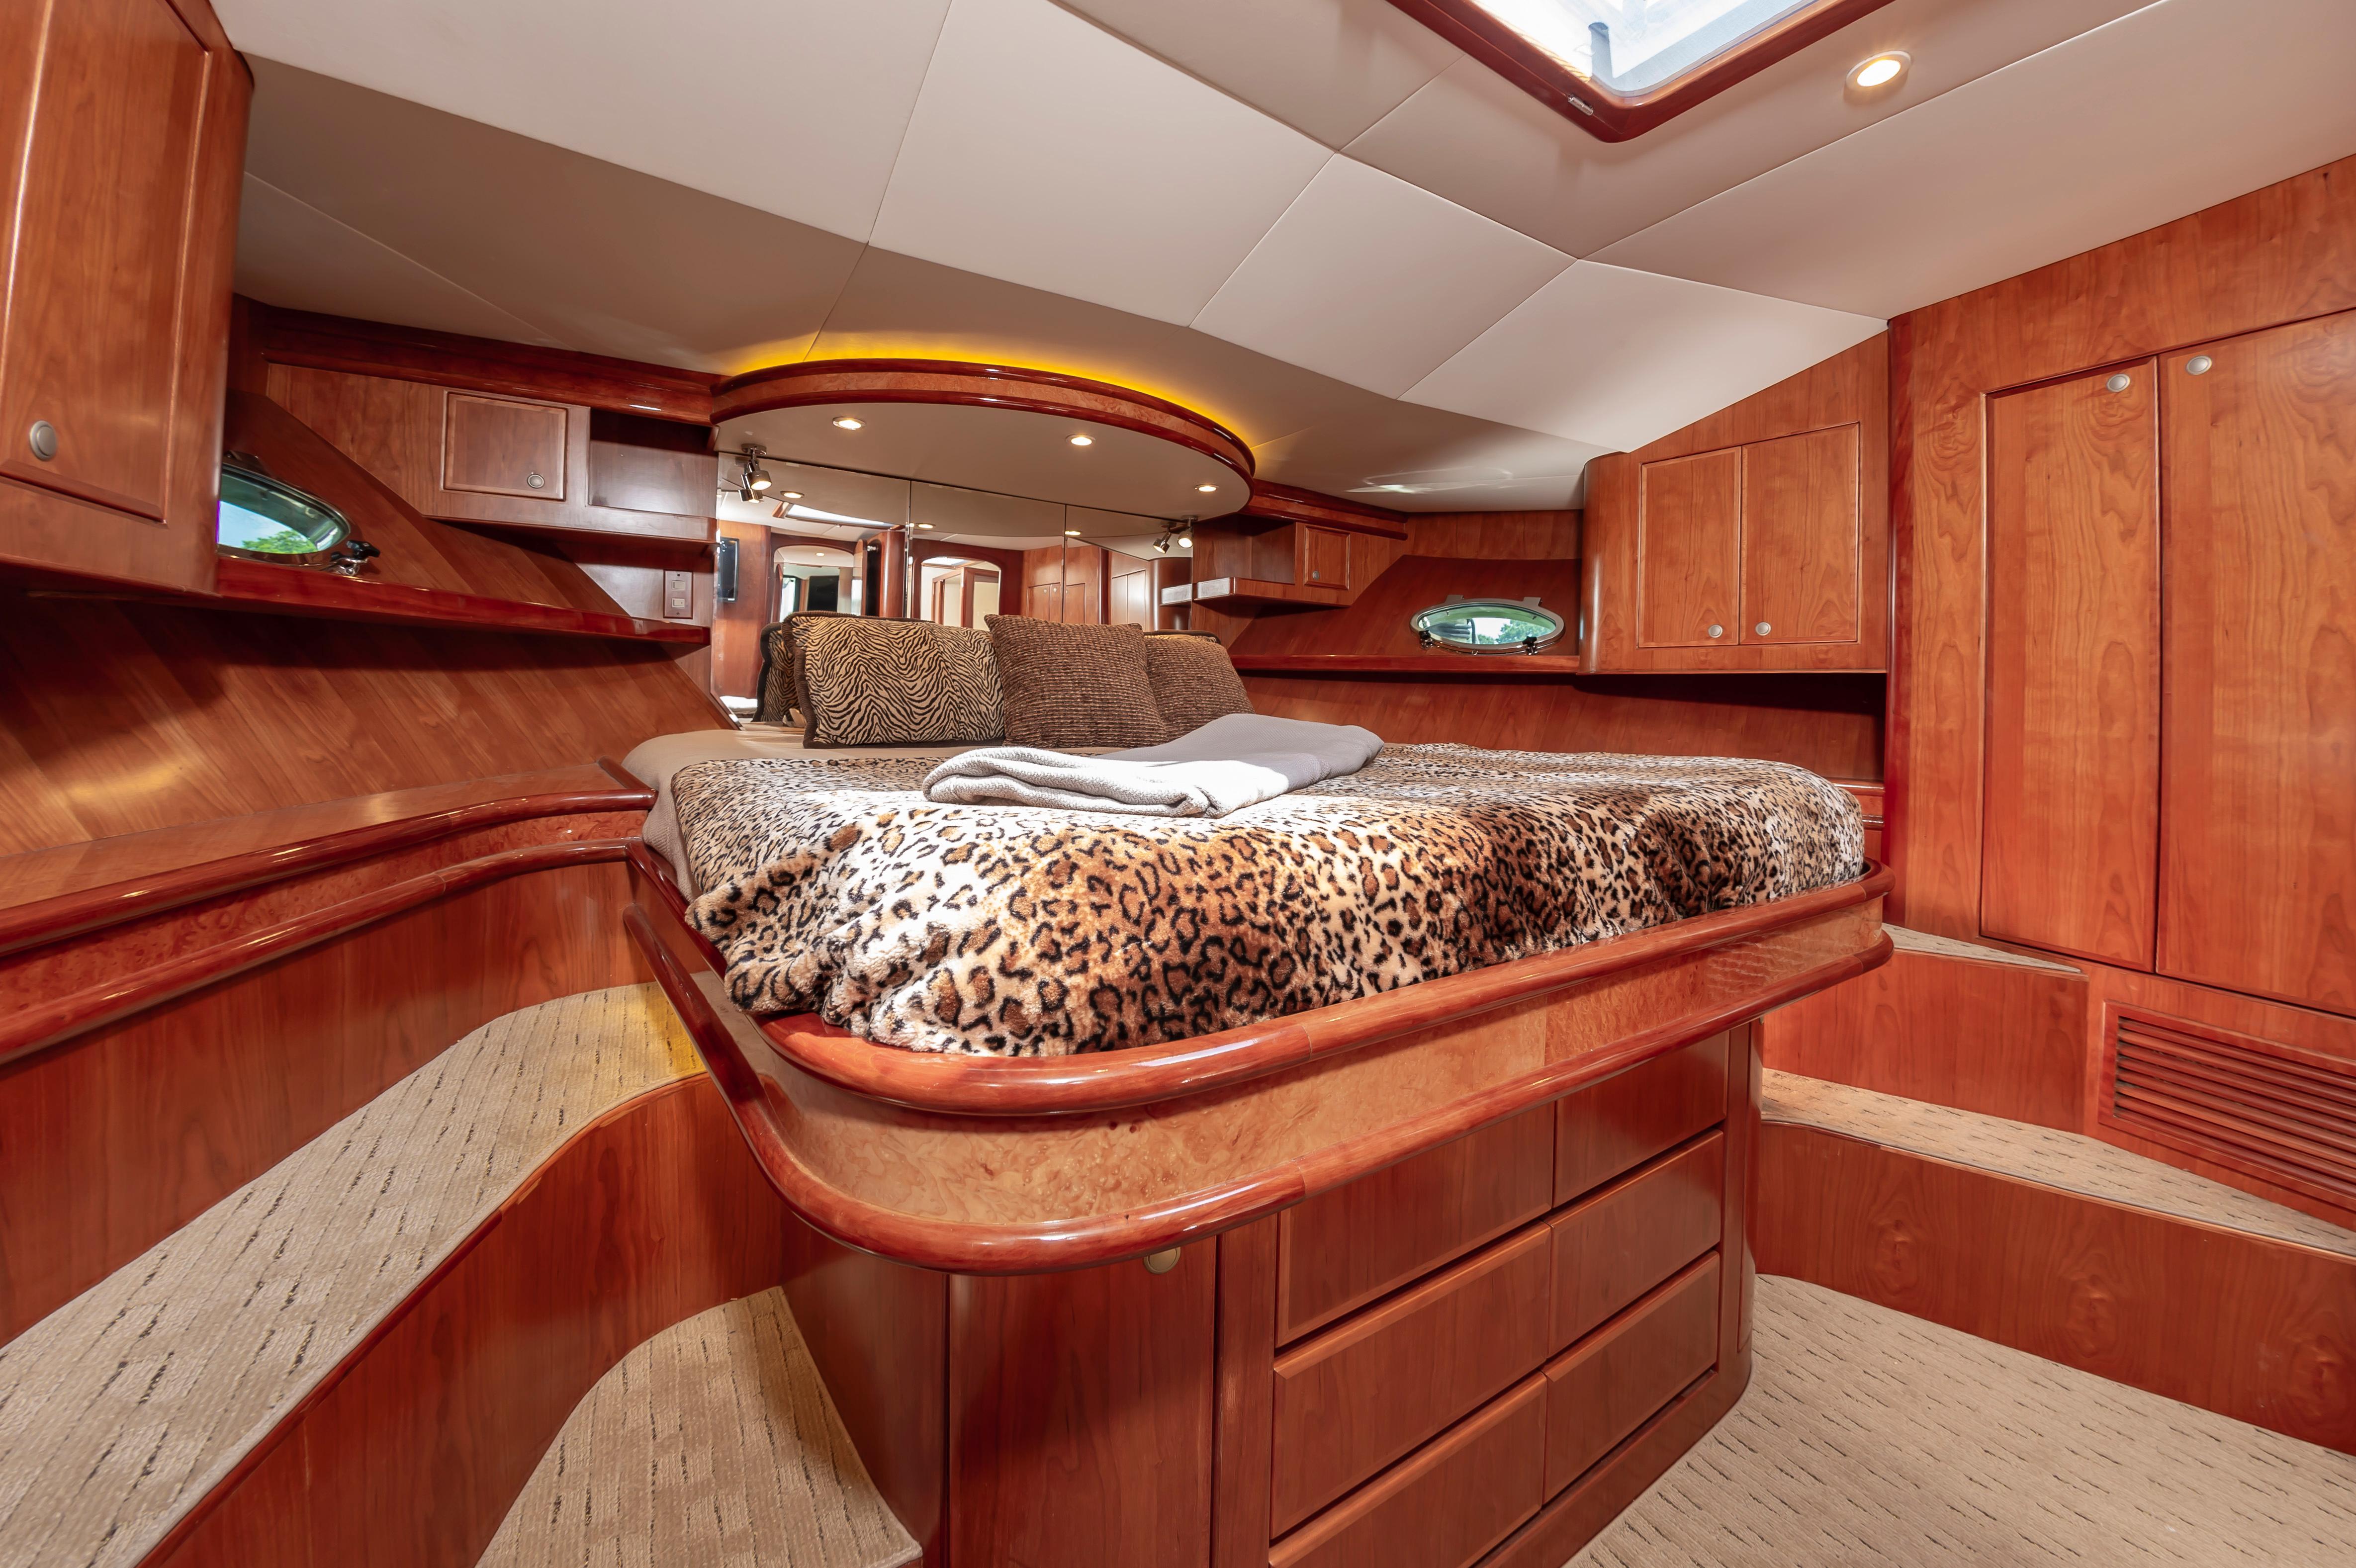 2016 Mikelson 50' S/F, Master Stateroom